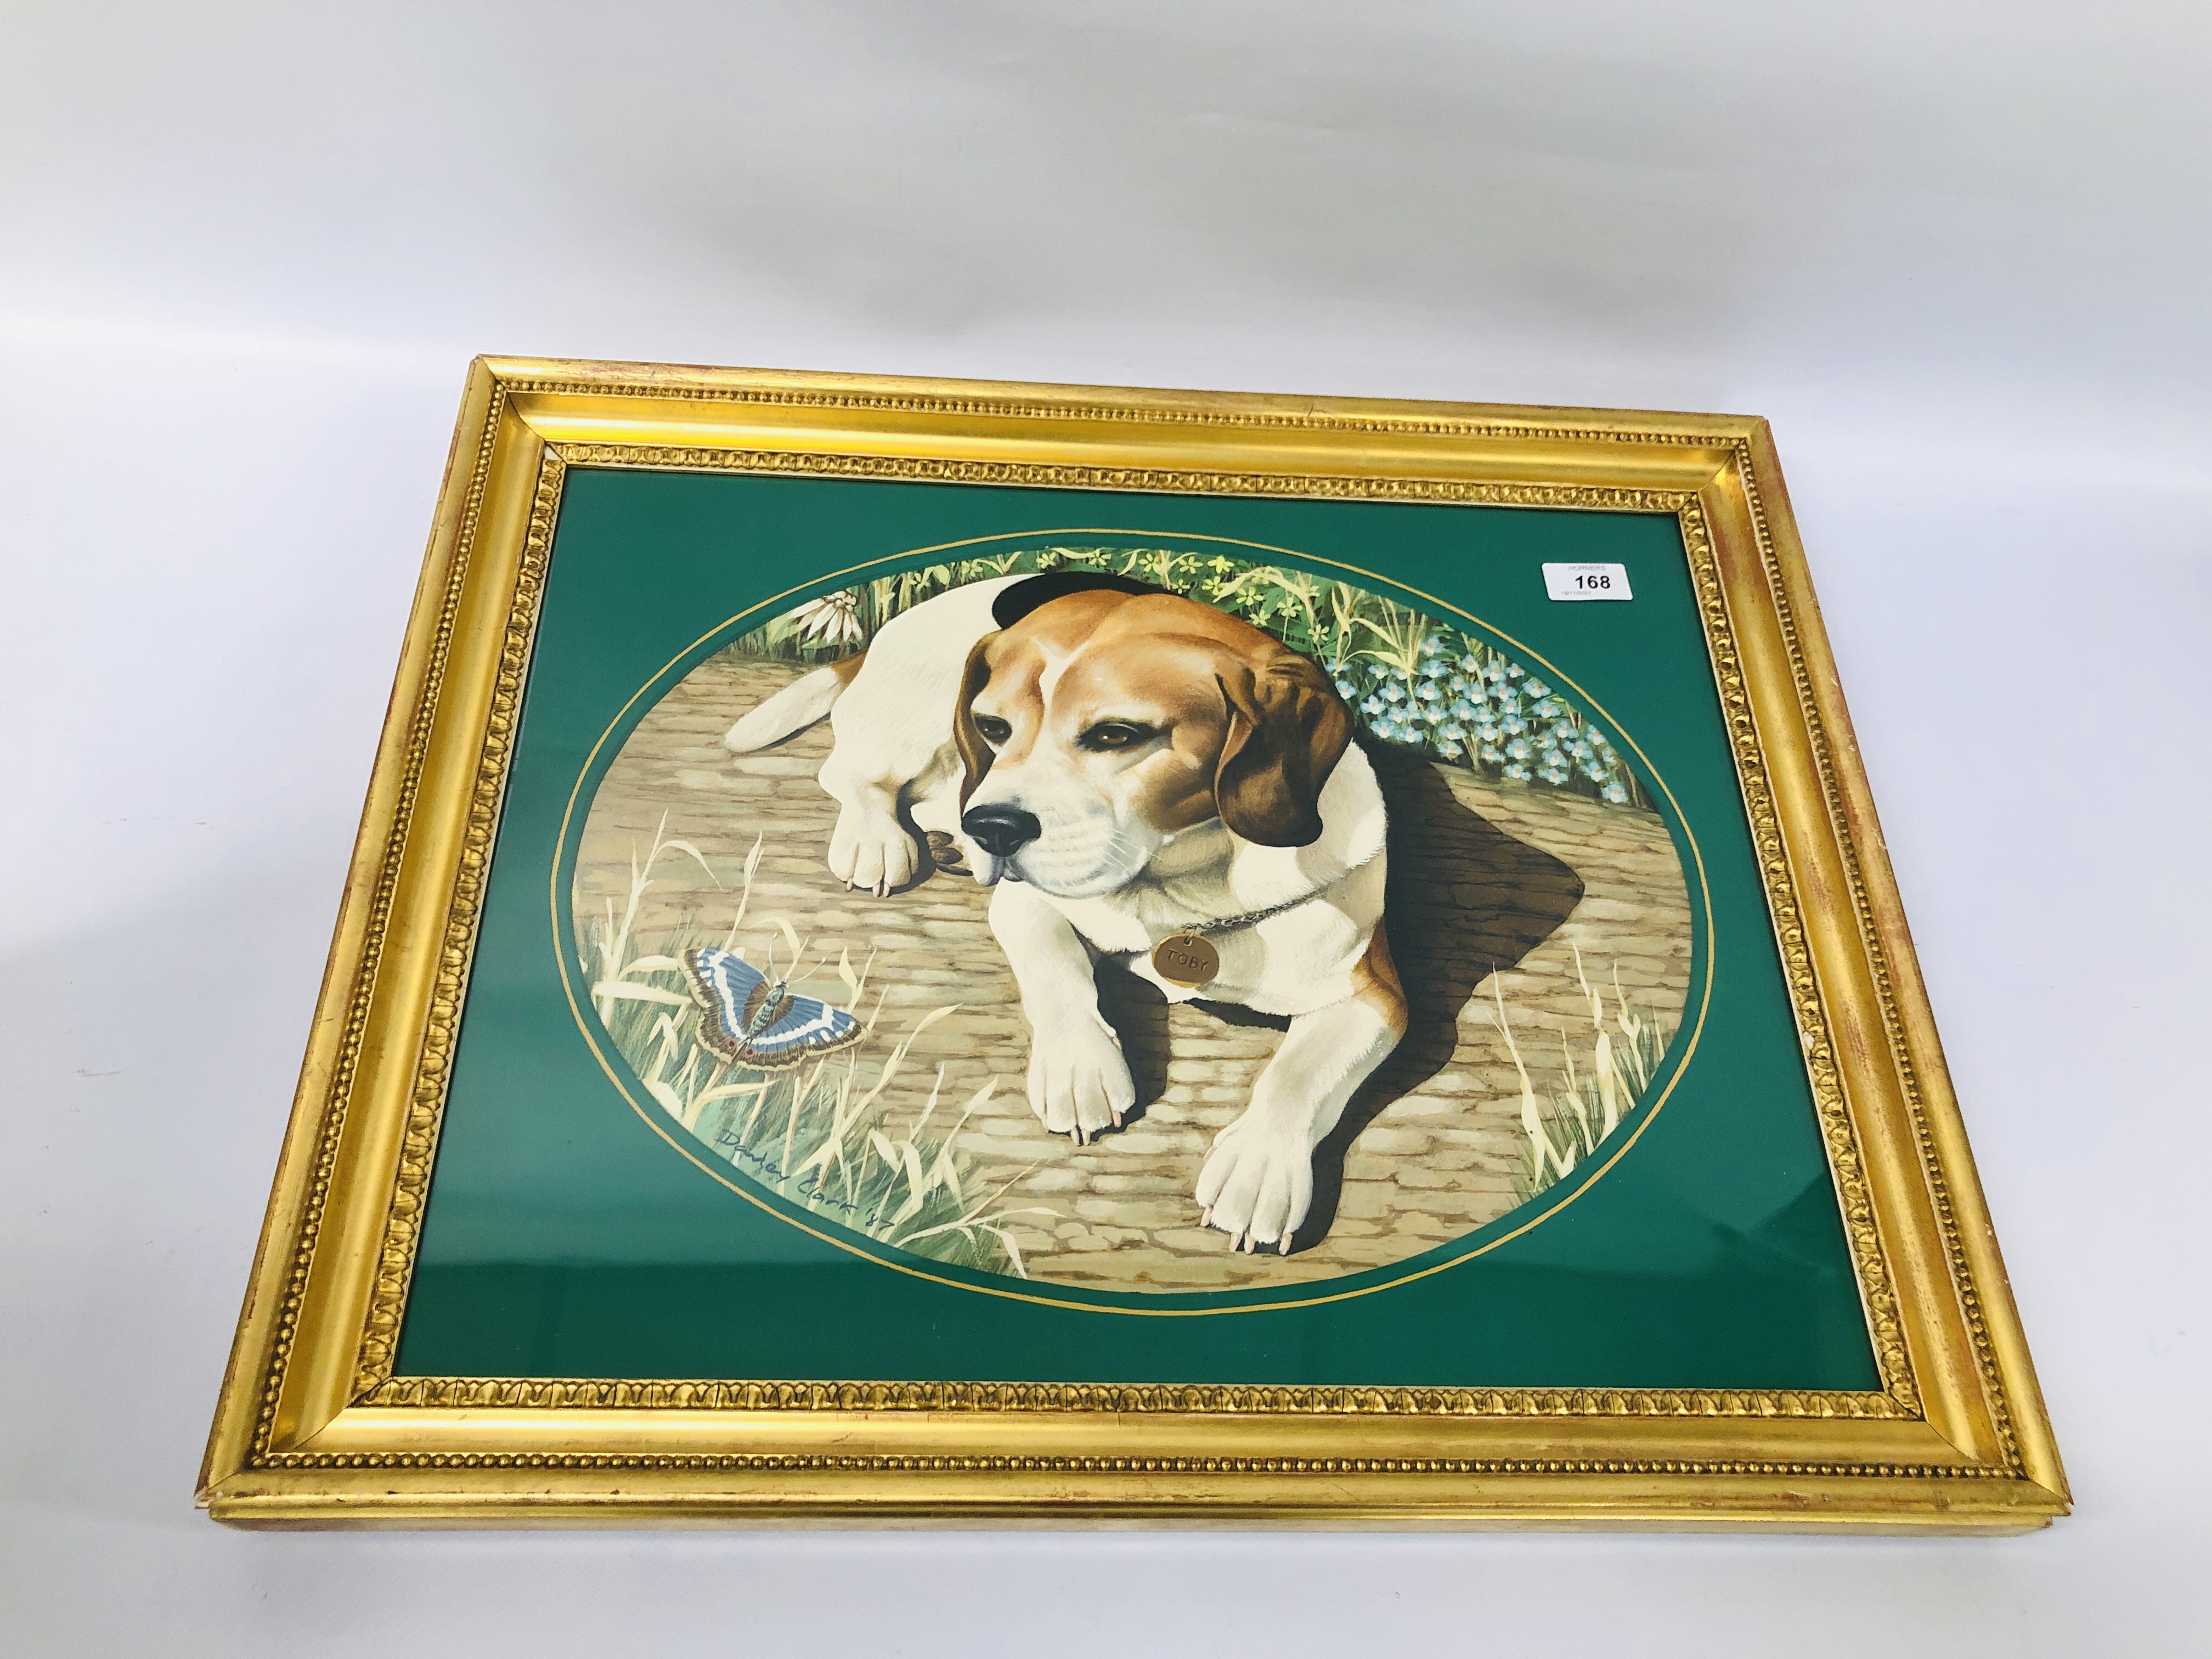 FRAMED OIL OF A BEAGLE "TOBY" IN OVAL MOUNT BEARING SIGNATURE D. CLARK - W 44CM. H 34CM. - Image 3 of 5